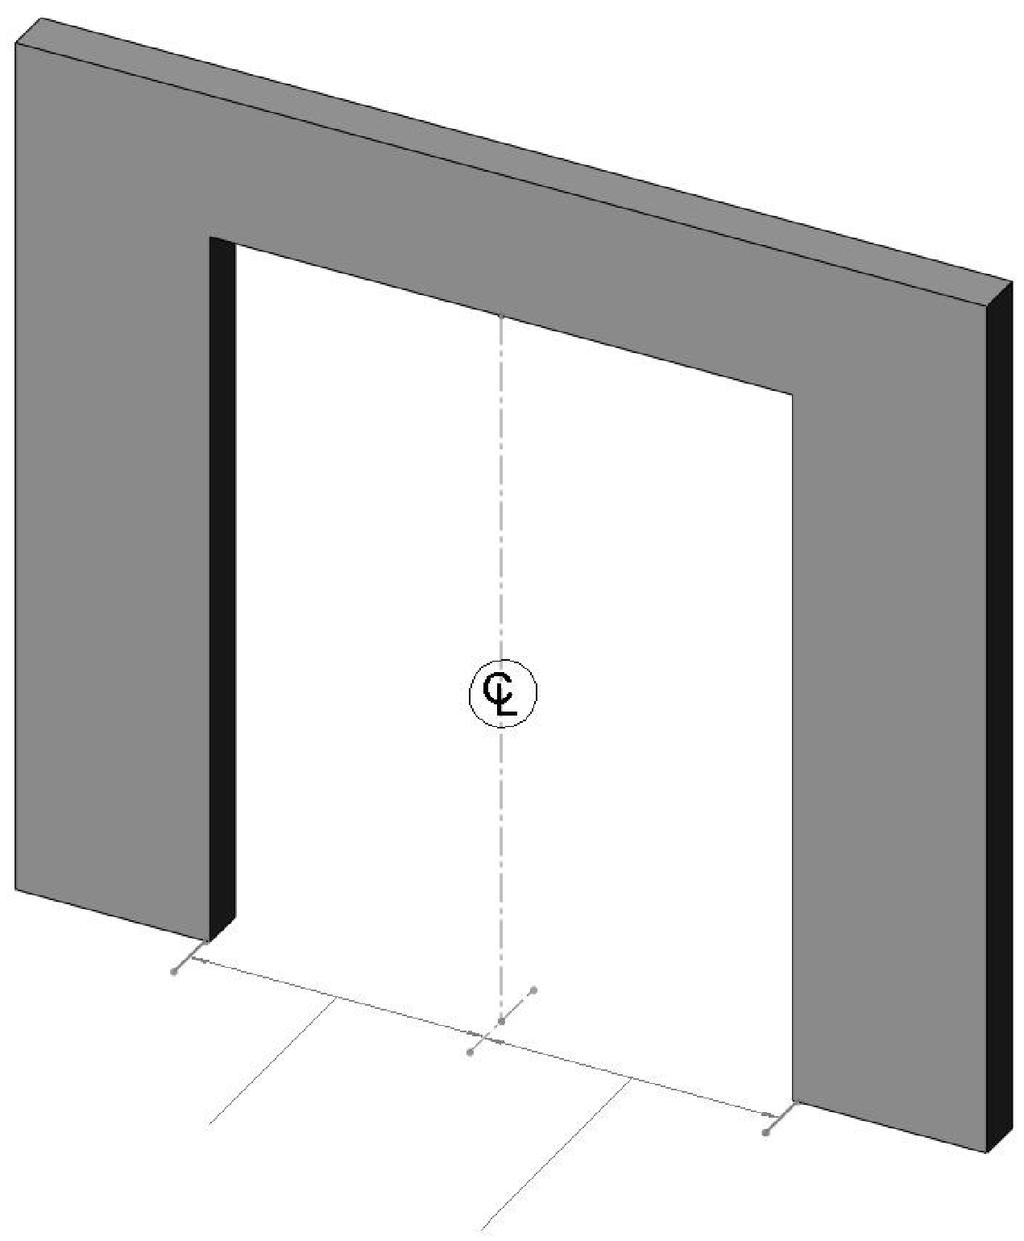 Mechanical Door Installation Ensure the opening has been inspected and the mounting surfaces have been prepared according to the instructions on pages 8 and 9 before proceeding with the mechanical